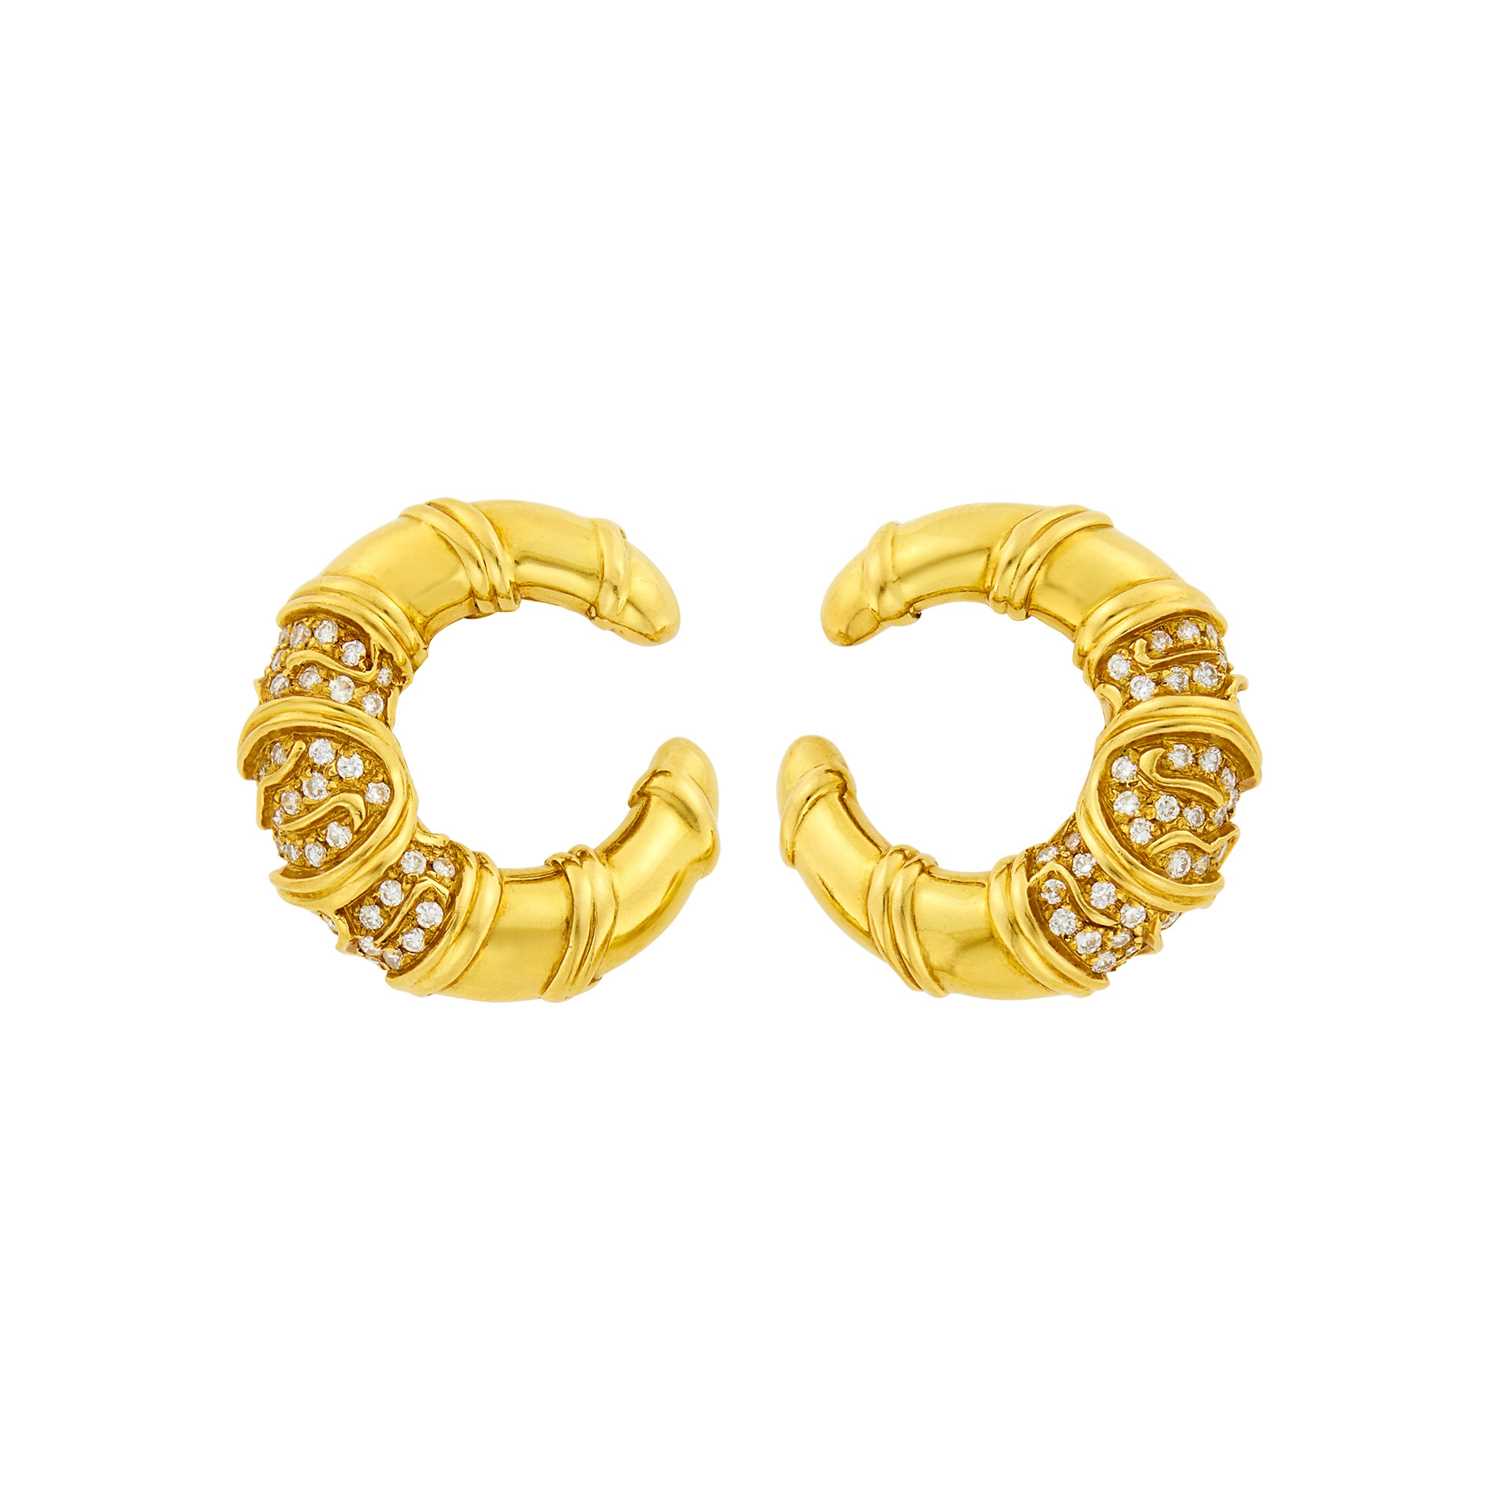 Lot 24 - Pair of Gold and Diamond Crescent Earclips